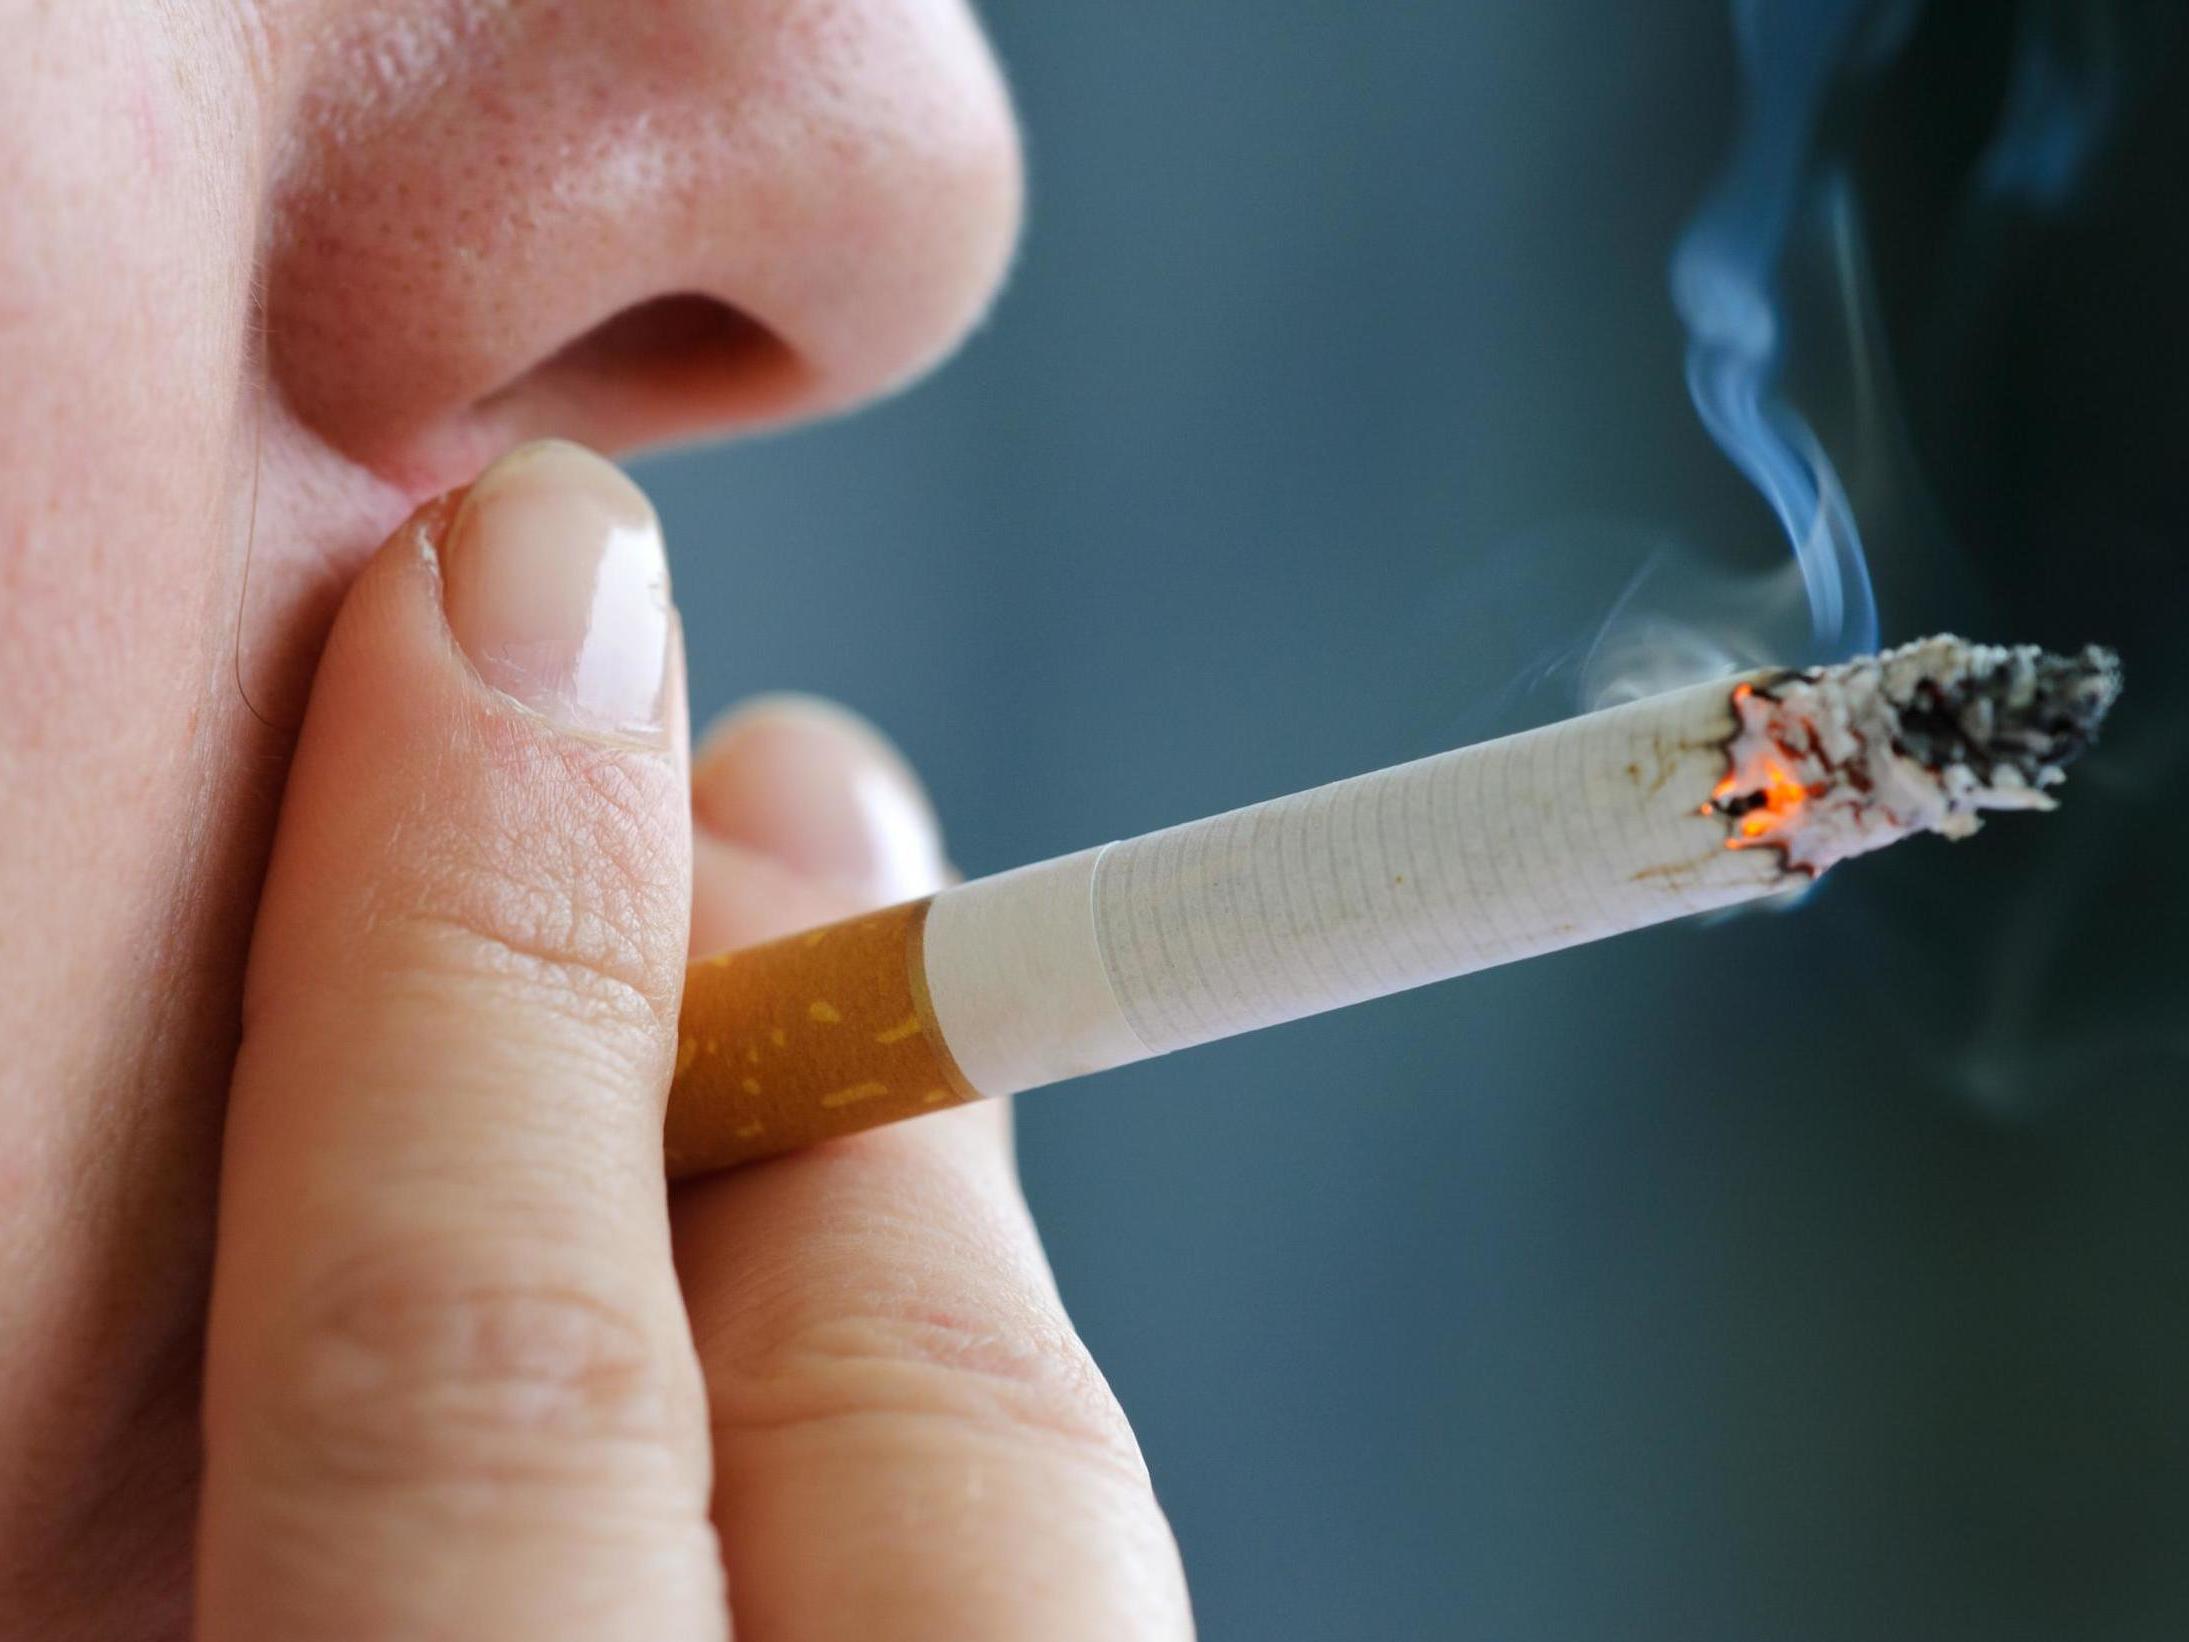 Majority of women find smokers unattractive, survey claims The Independent The Independent